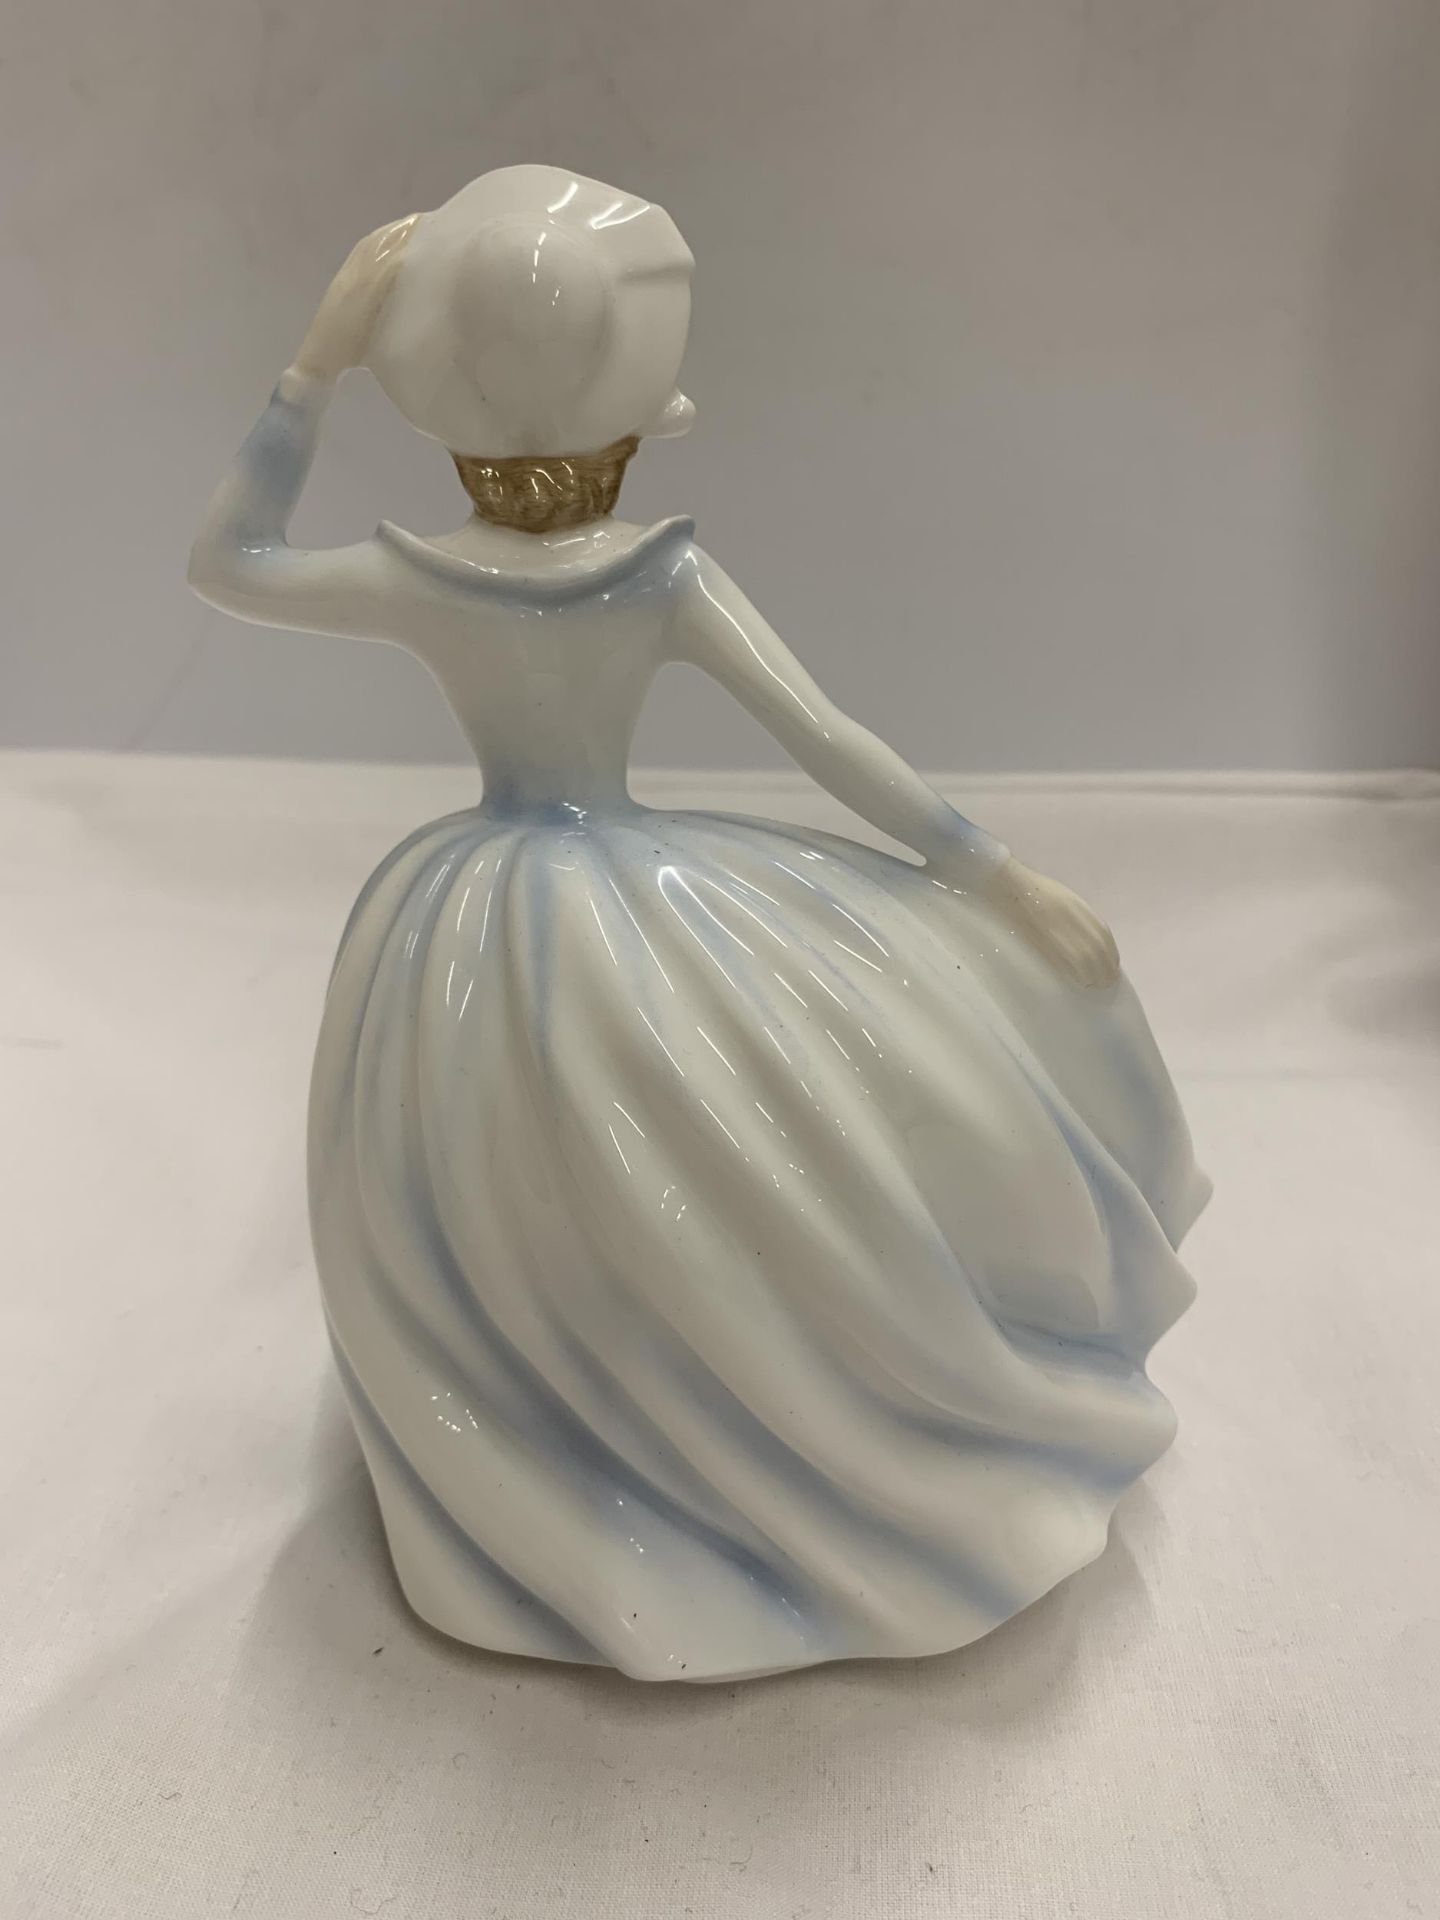 A ROYAL DOULTON LADY FIGURE IN BLUE DRESS - Image 4 of 6